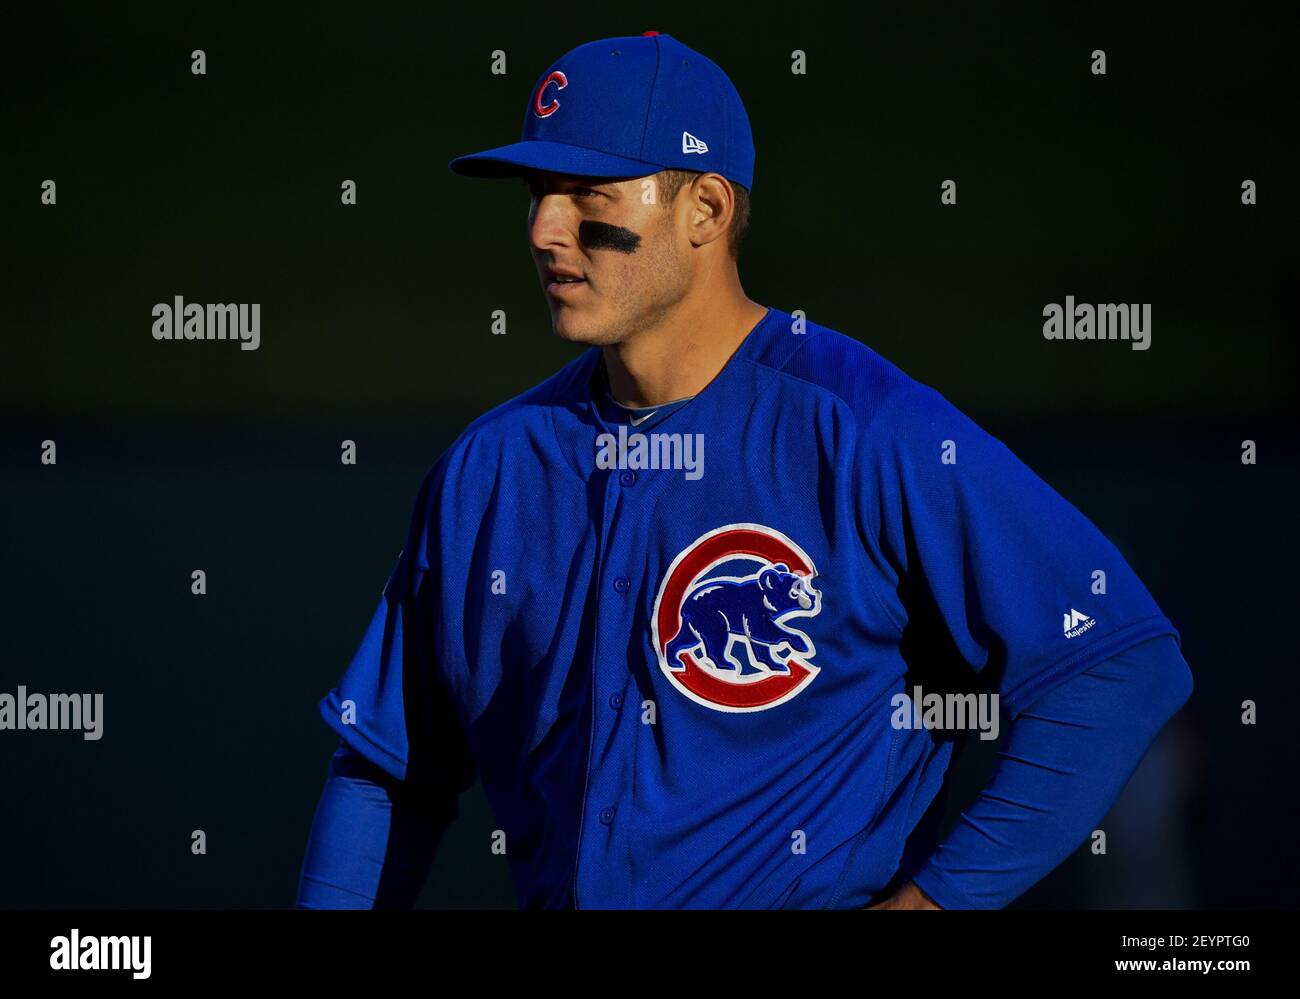 Mar 31, 2019: Chicago Cubs first baseman Anthony Rizzo #44 at first base  during an MLB game between the Chicago Cubs and the Texas Rangers at Globe  Life Park in Arlington, TX